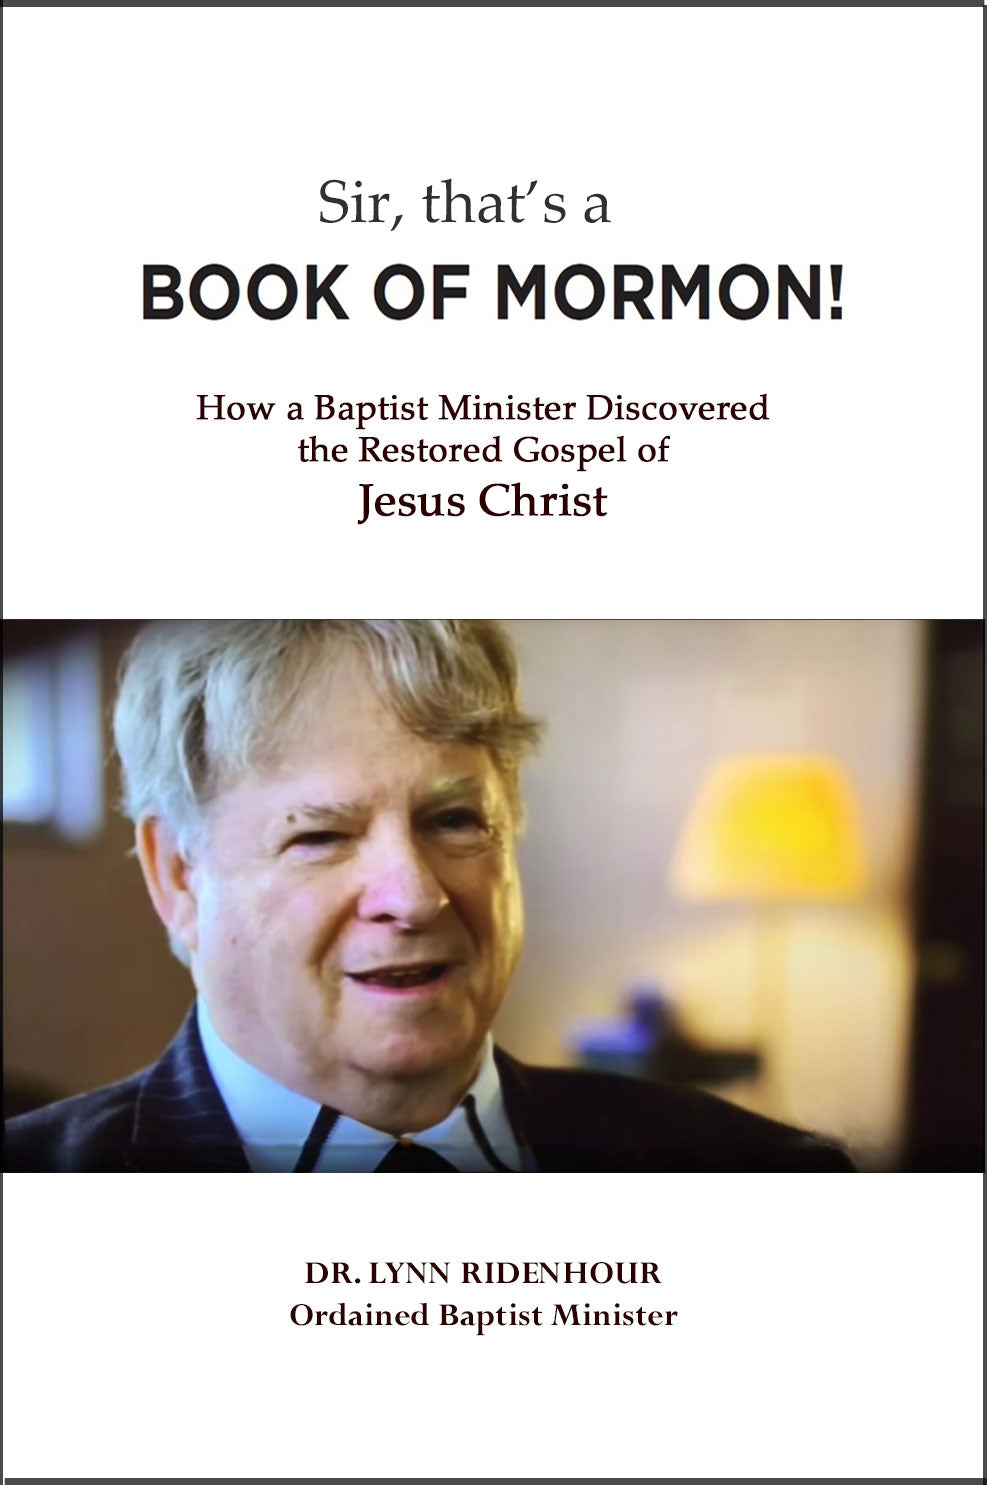 Sir, That's a Book of Mormon!: How One Baptist Minister Discovered the Restored Gospel of Jesus Christ